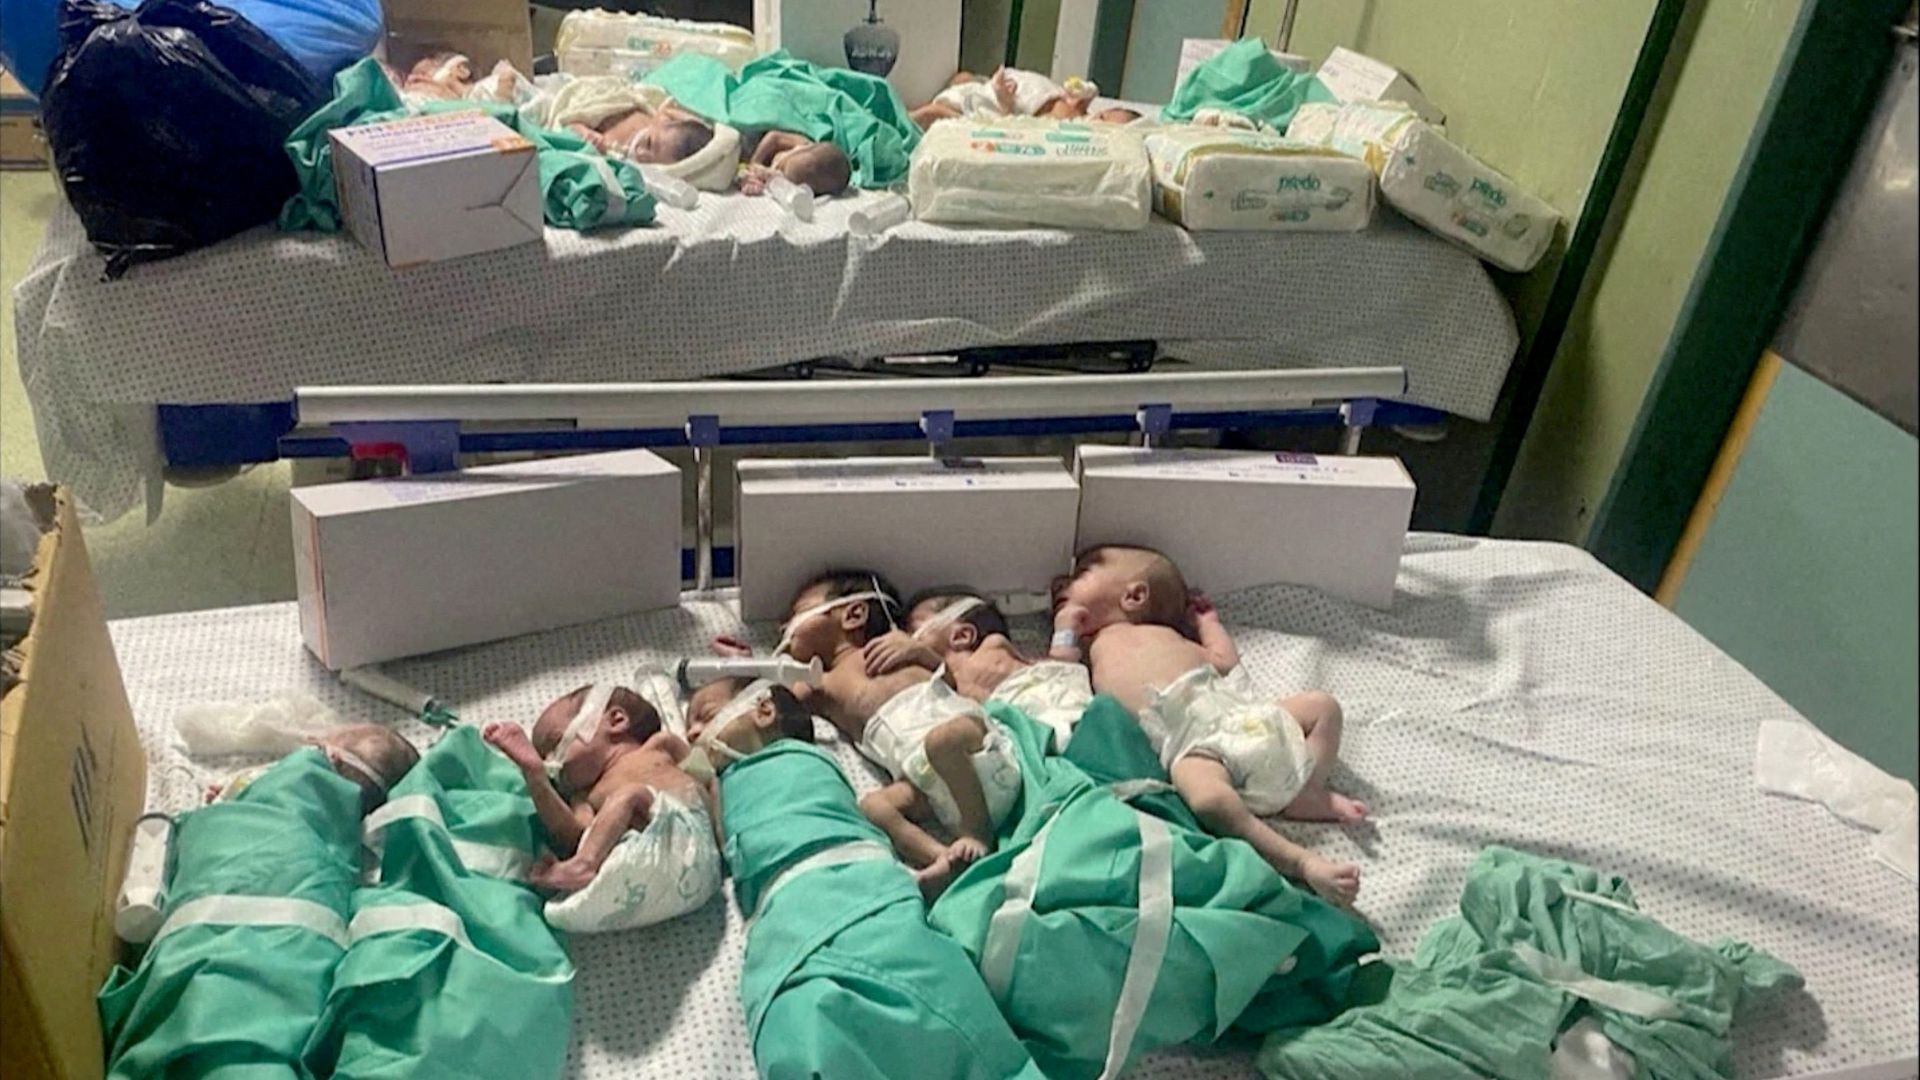 Newborns are placed in bed after being taken off incubators in Gaza's Al Shifa hospital after power outage. /Reuters